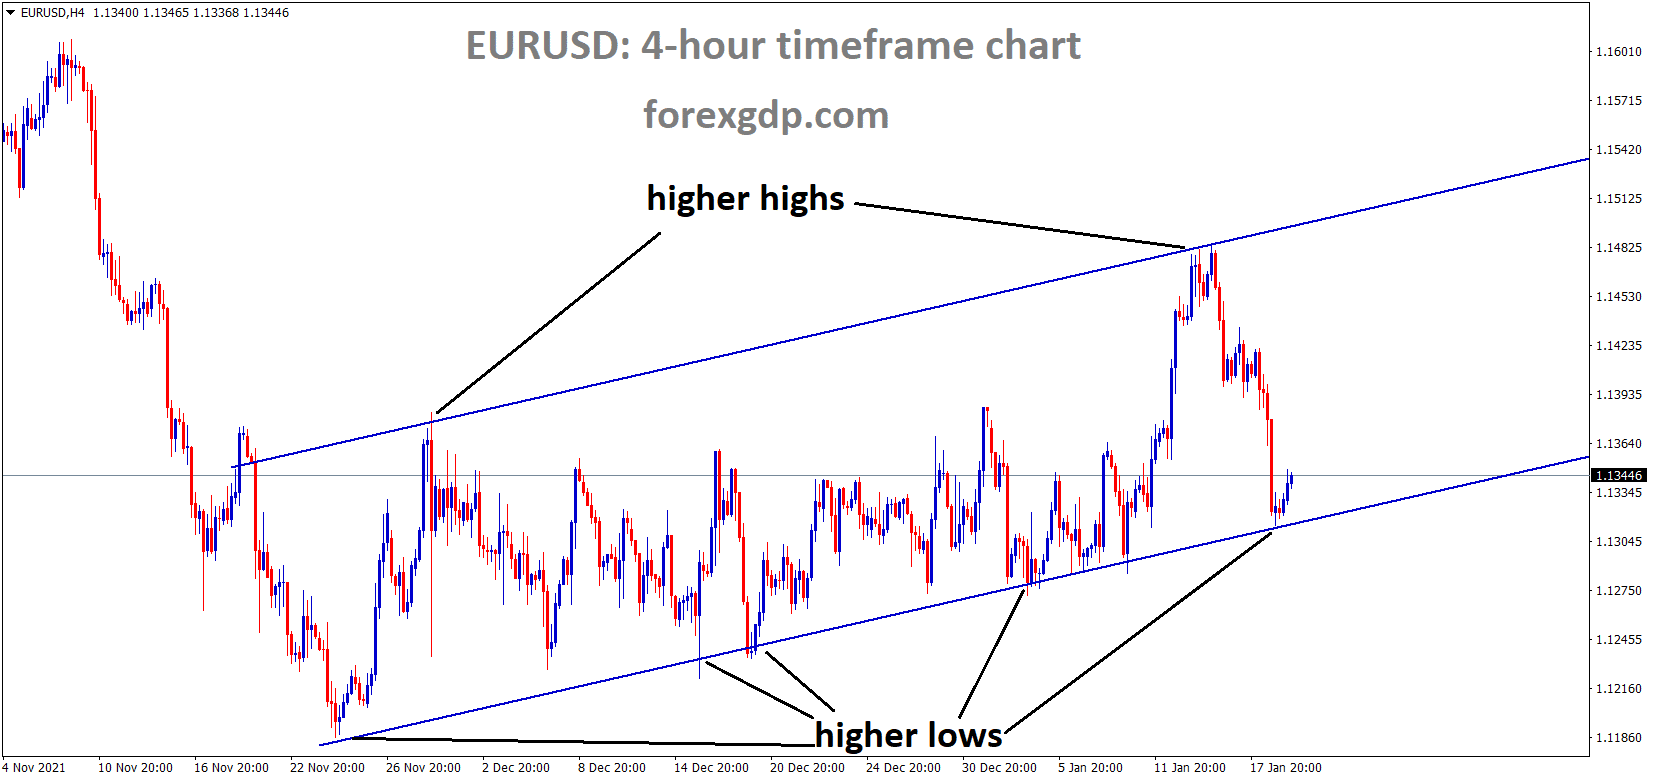 EURUSD is moving in an ascending channel and the market has rebounded from the higher low area of the Ascending channel.